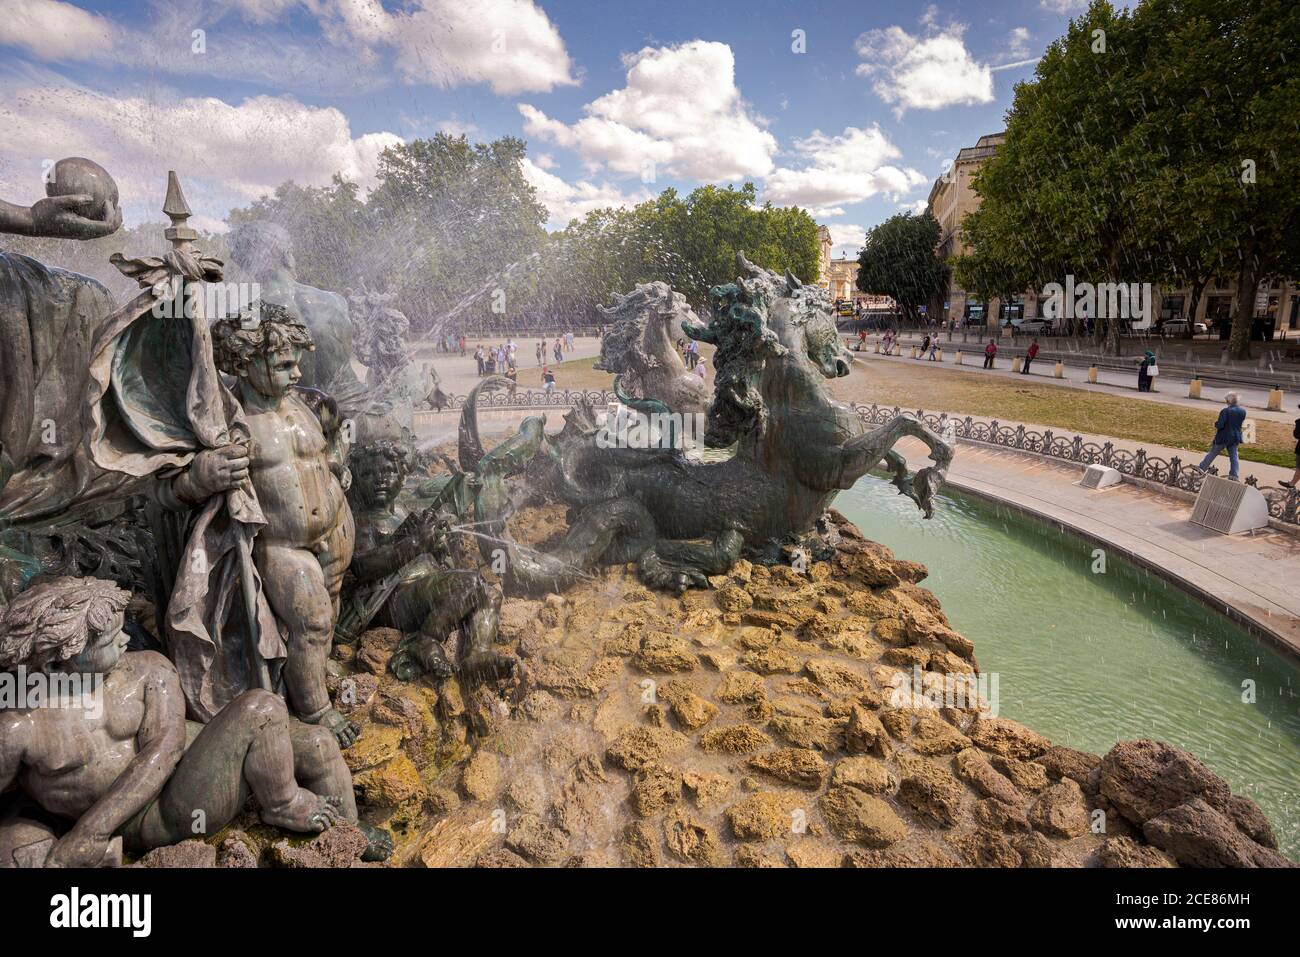 BORDEAUX, FRANCE – AUGUST 13, 2017: Detail of the fountain of the Monument aux Girondins in the Place des Quinconces Stock Photo